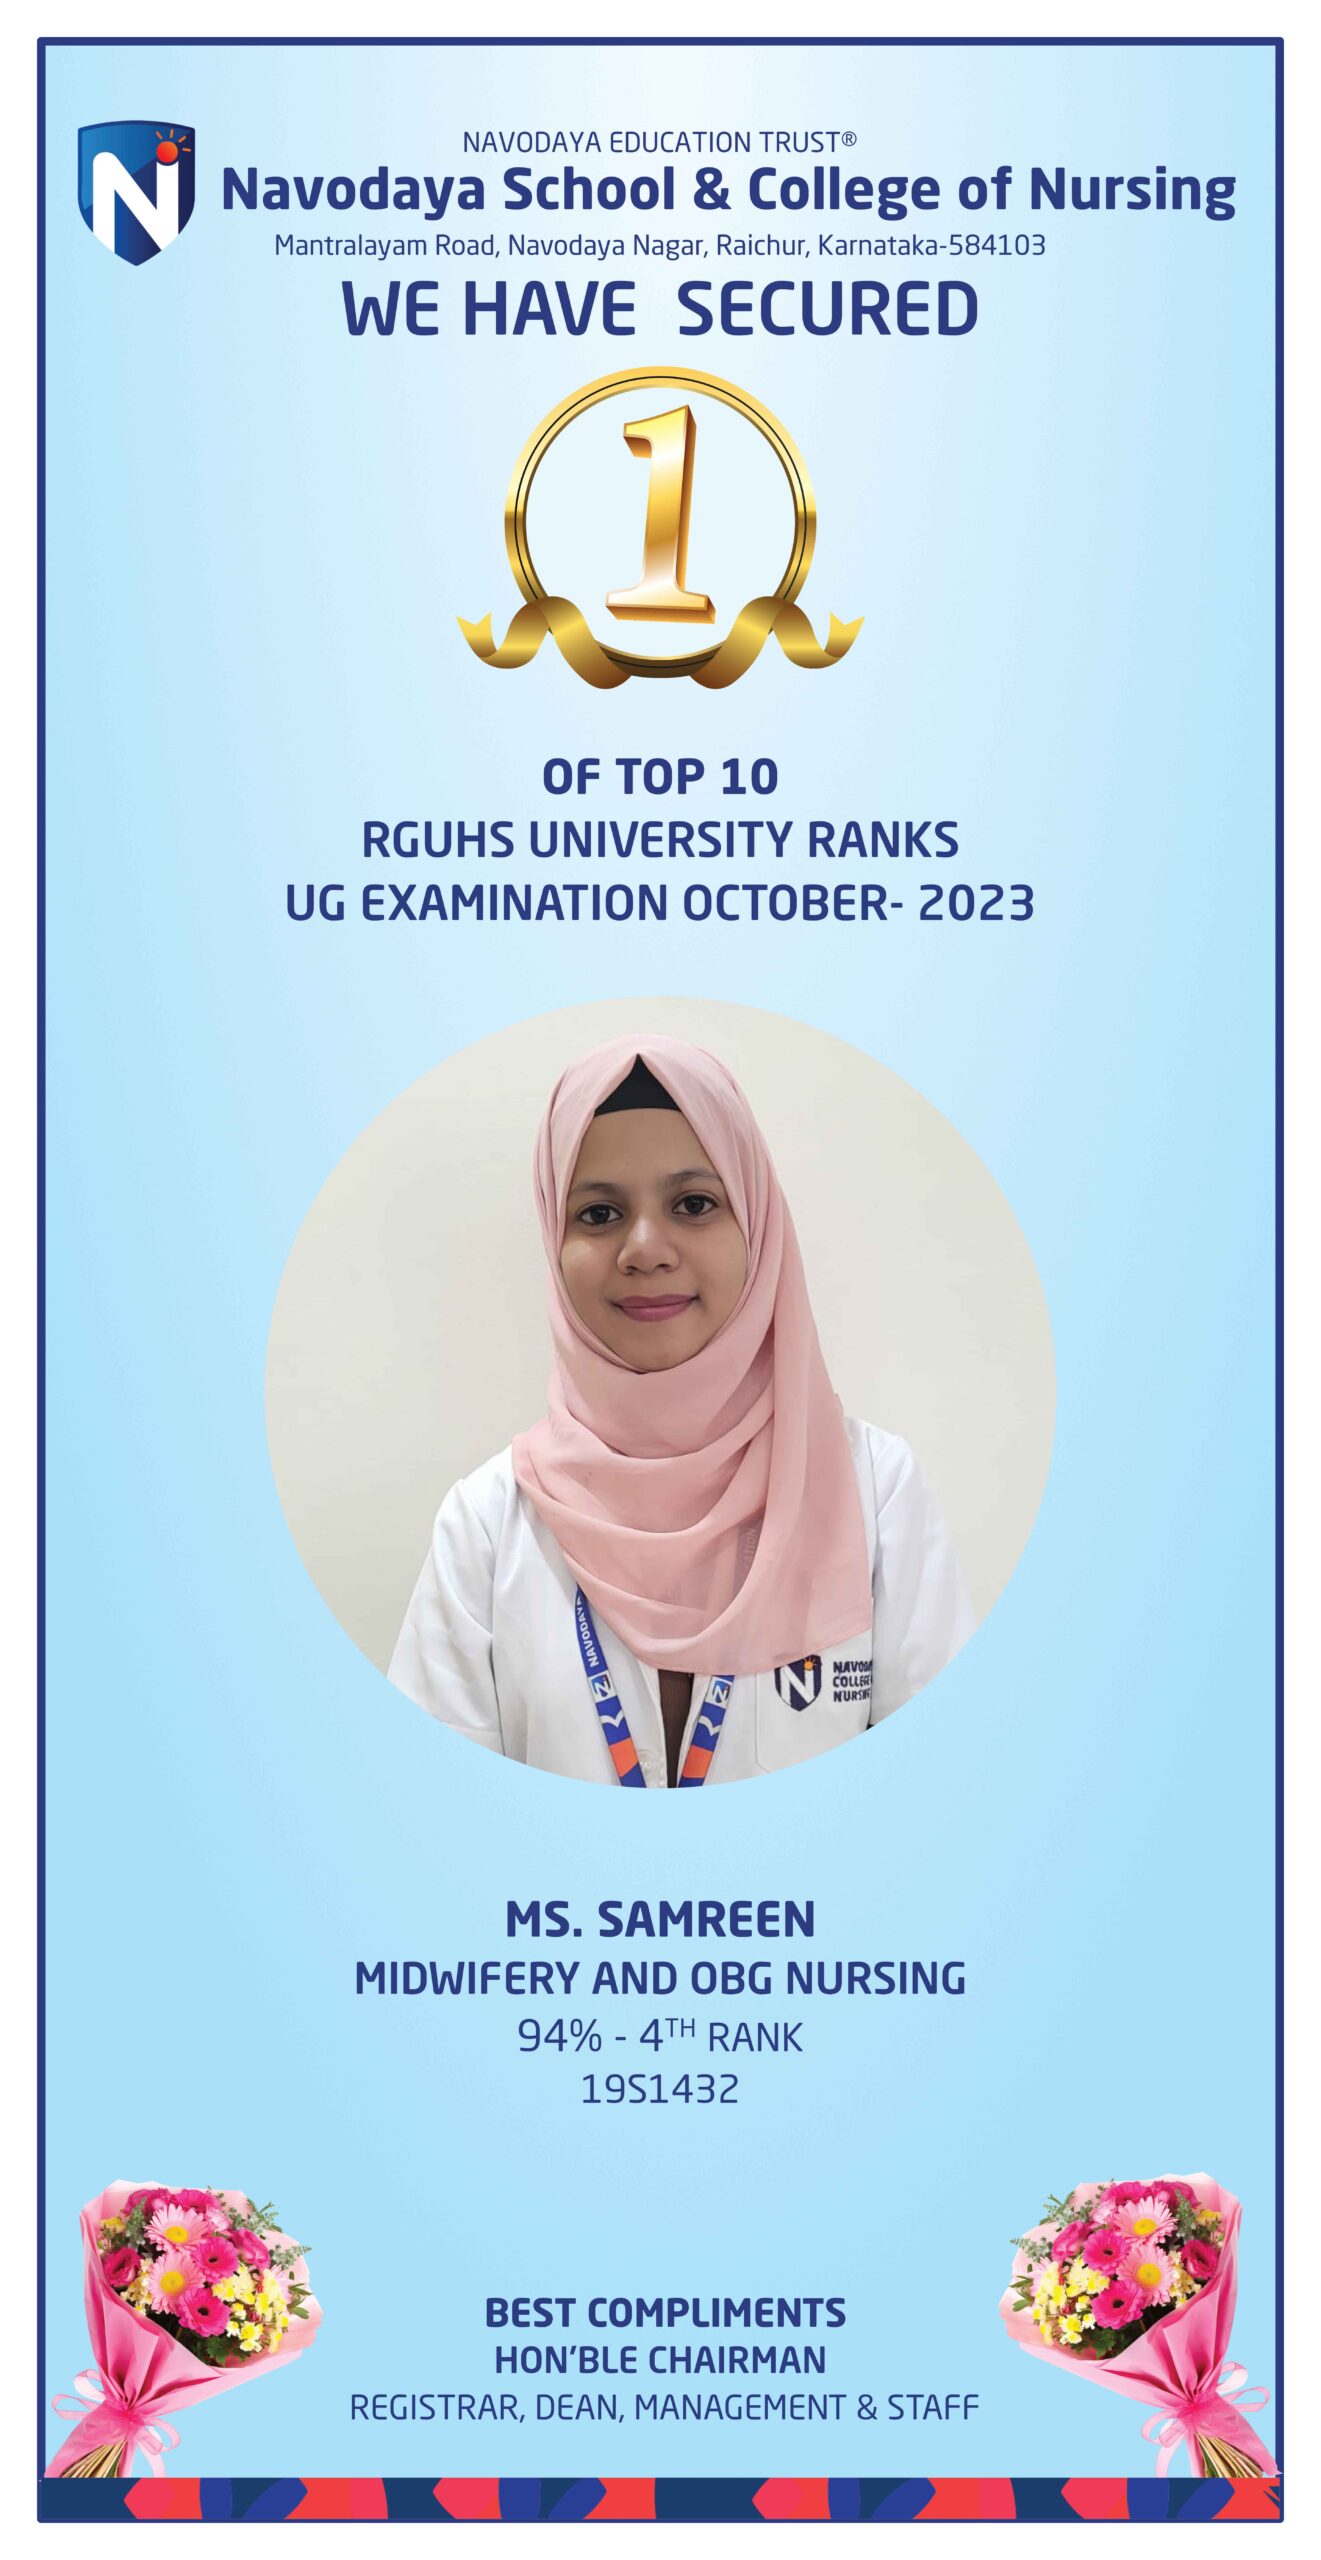 🎉 **Congratulations to Ms. Samreen for Achieving Excellence in Midwifery and Obstetrical Nursing!** 🎉